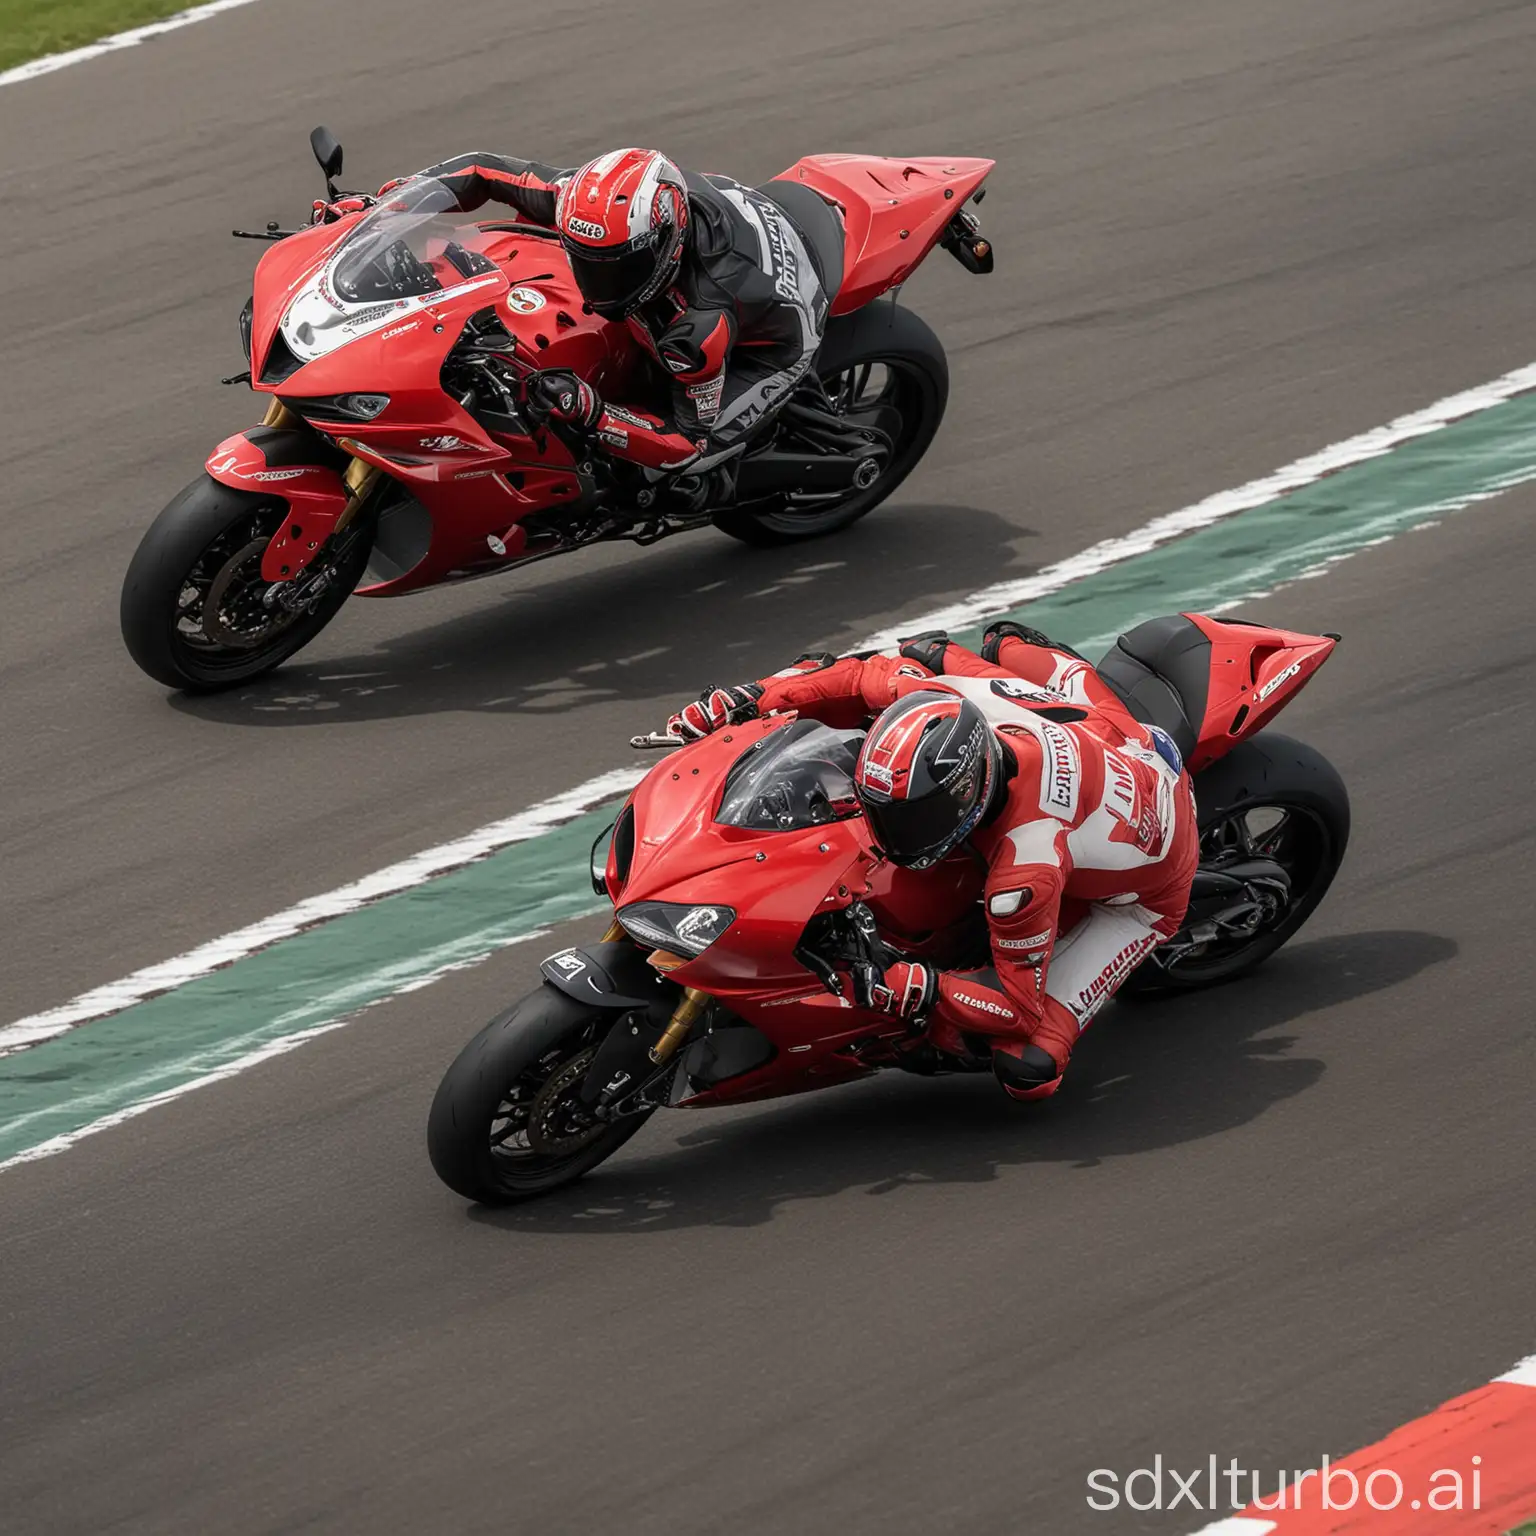 A black Jaguar runs next to a red Ducati Superbike on the racetrack